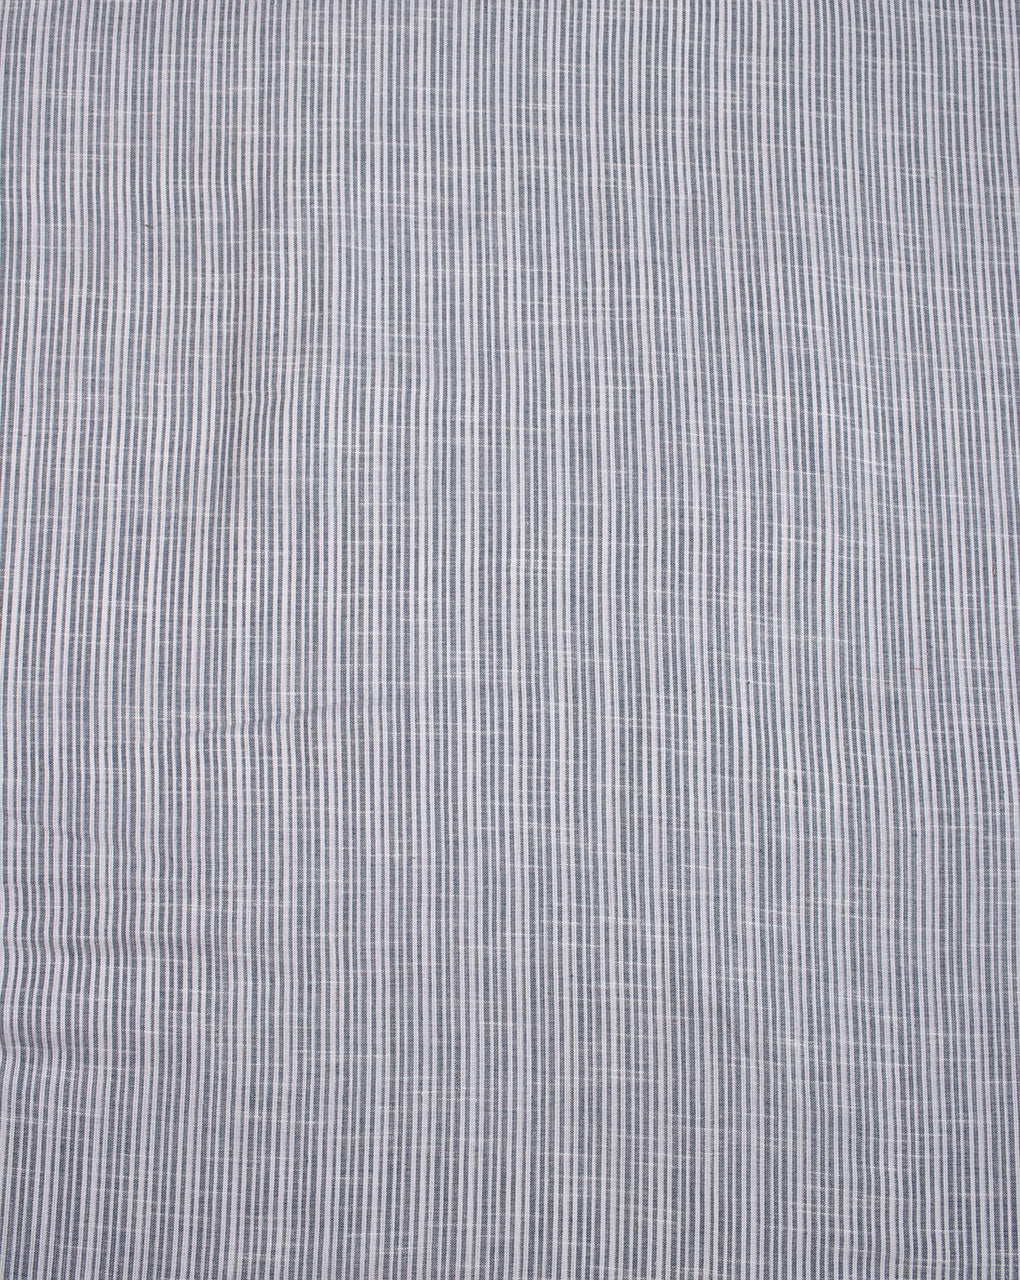 Stripes Woven Loom Textured Cotton Fabric - Fabriclore.com